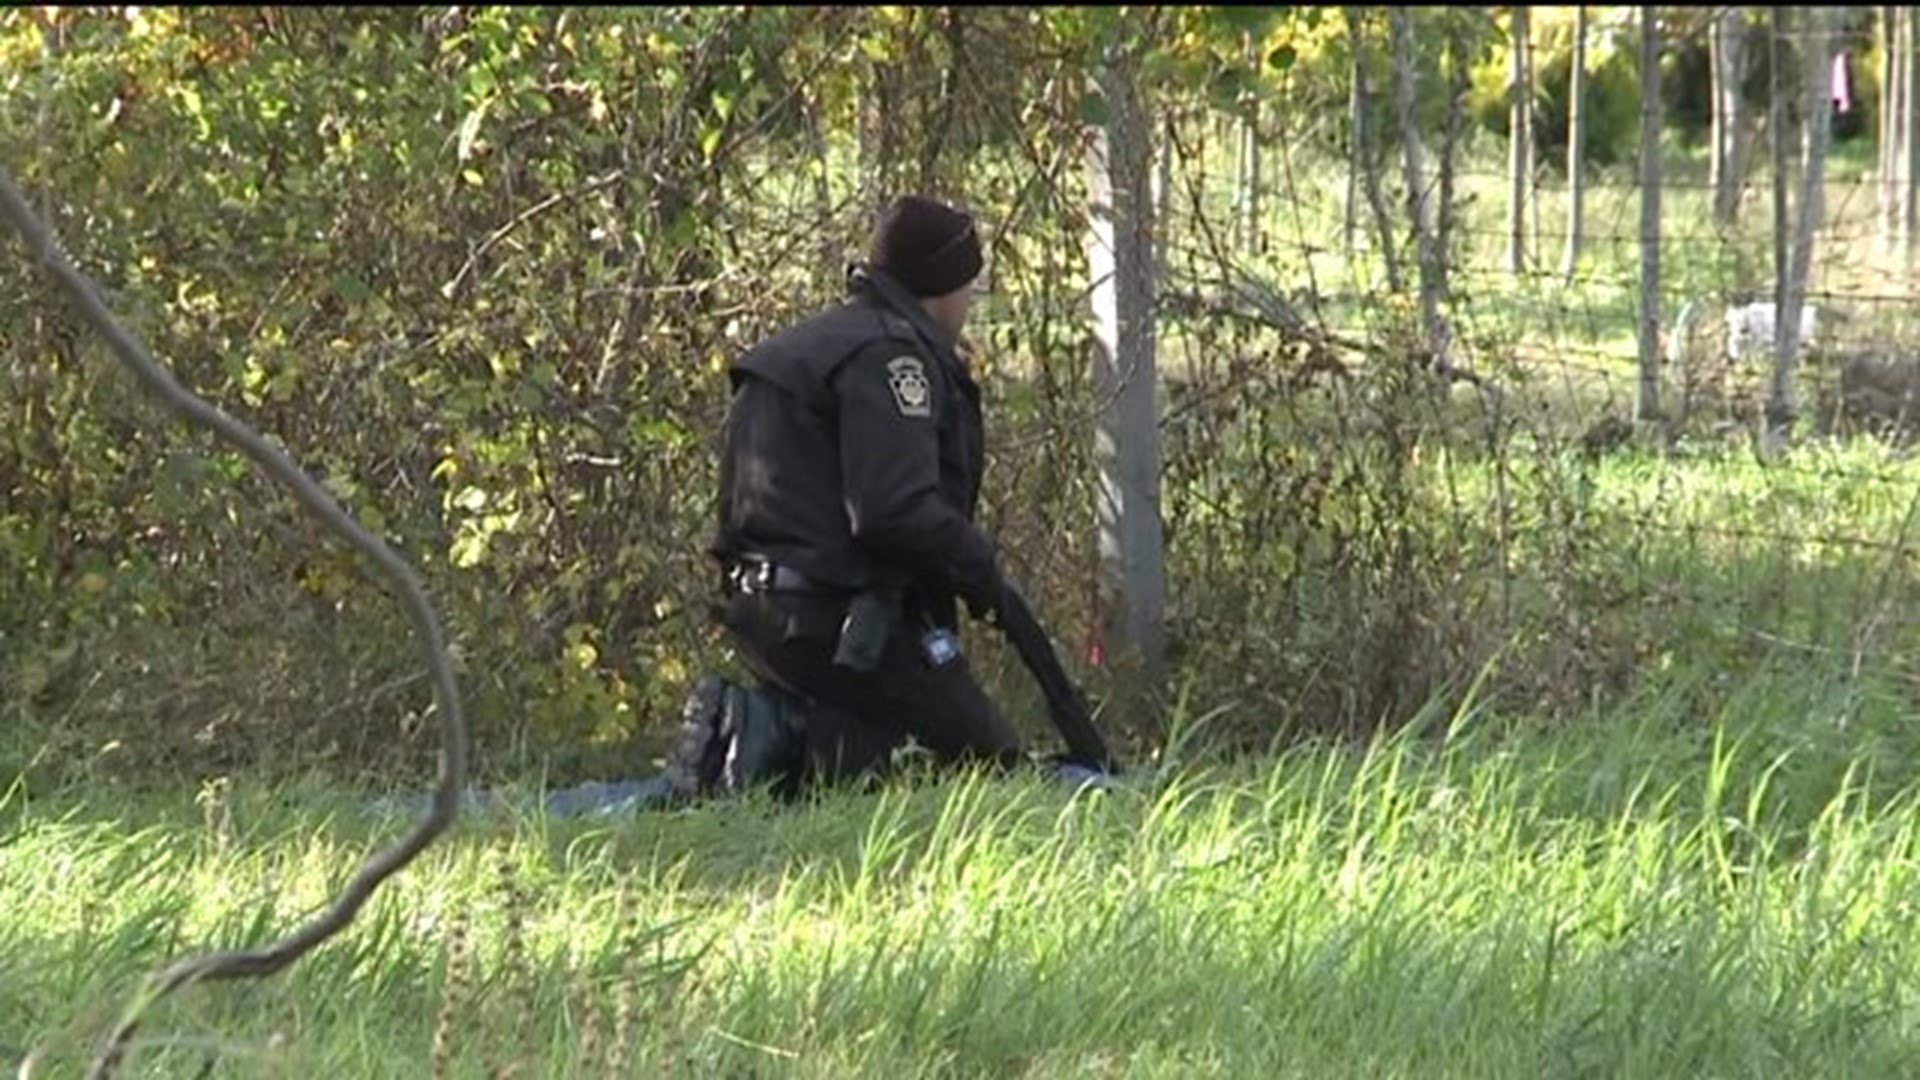 Police Activity Picks Up in Search for Eric Frein